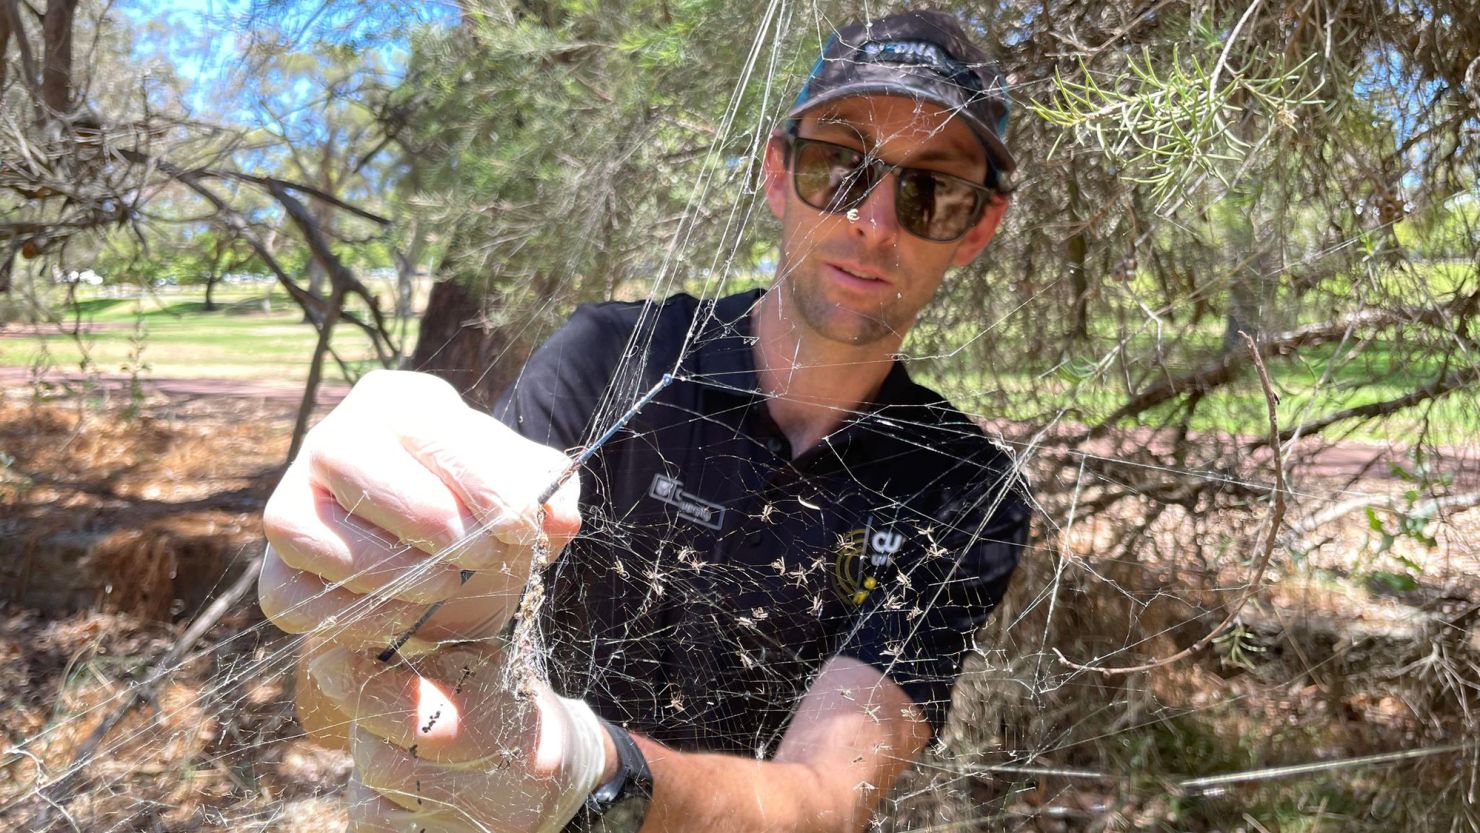 Joshua Newton, a doctoral student at Curtin University’s School of Molecular and Life Sciences near Perth, collecting a golden orb spiderweb.